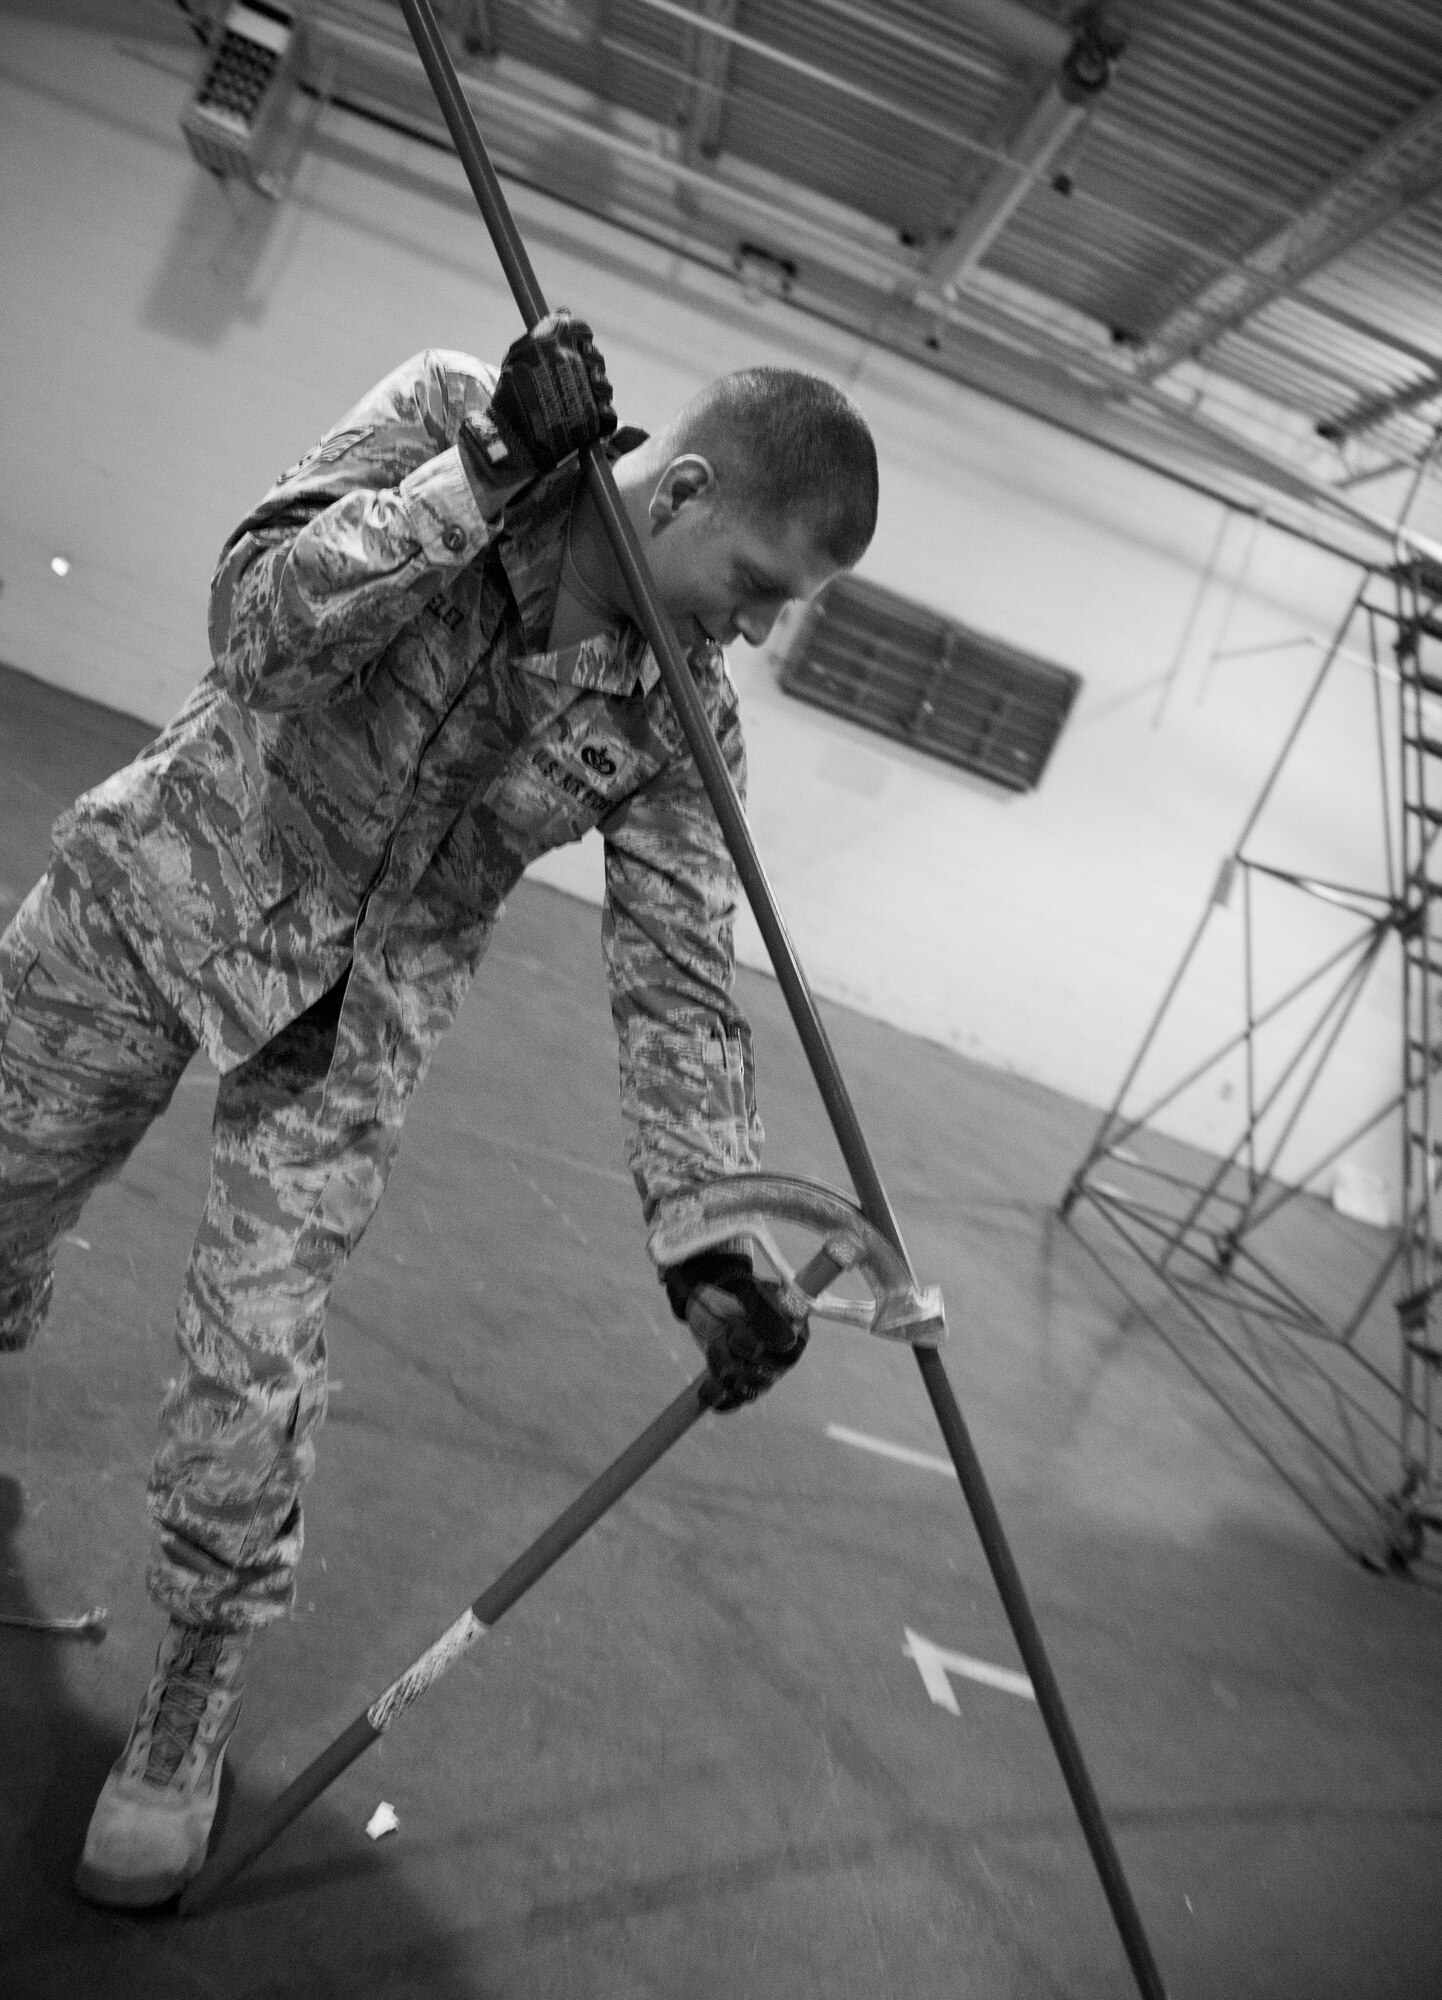 Staff Sgt. Wesley Velez, 1st Special Operations Civil Engineer Squadron electrical systems craftsman, bends a conduit on Hurlburt Field, Fla., Feb. 18, 2015. Some conduits were bent to fit around ceiling fixtures. (U.S. Air Force photo/Senior Airman Krystal M. Garrett)